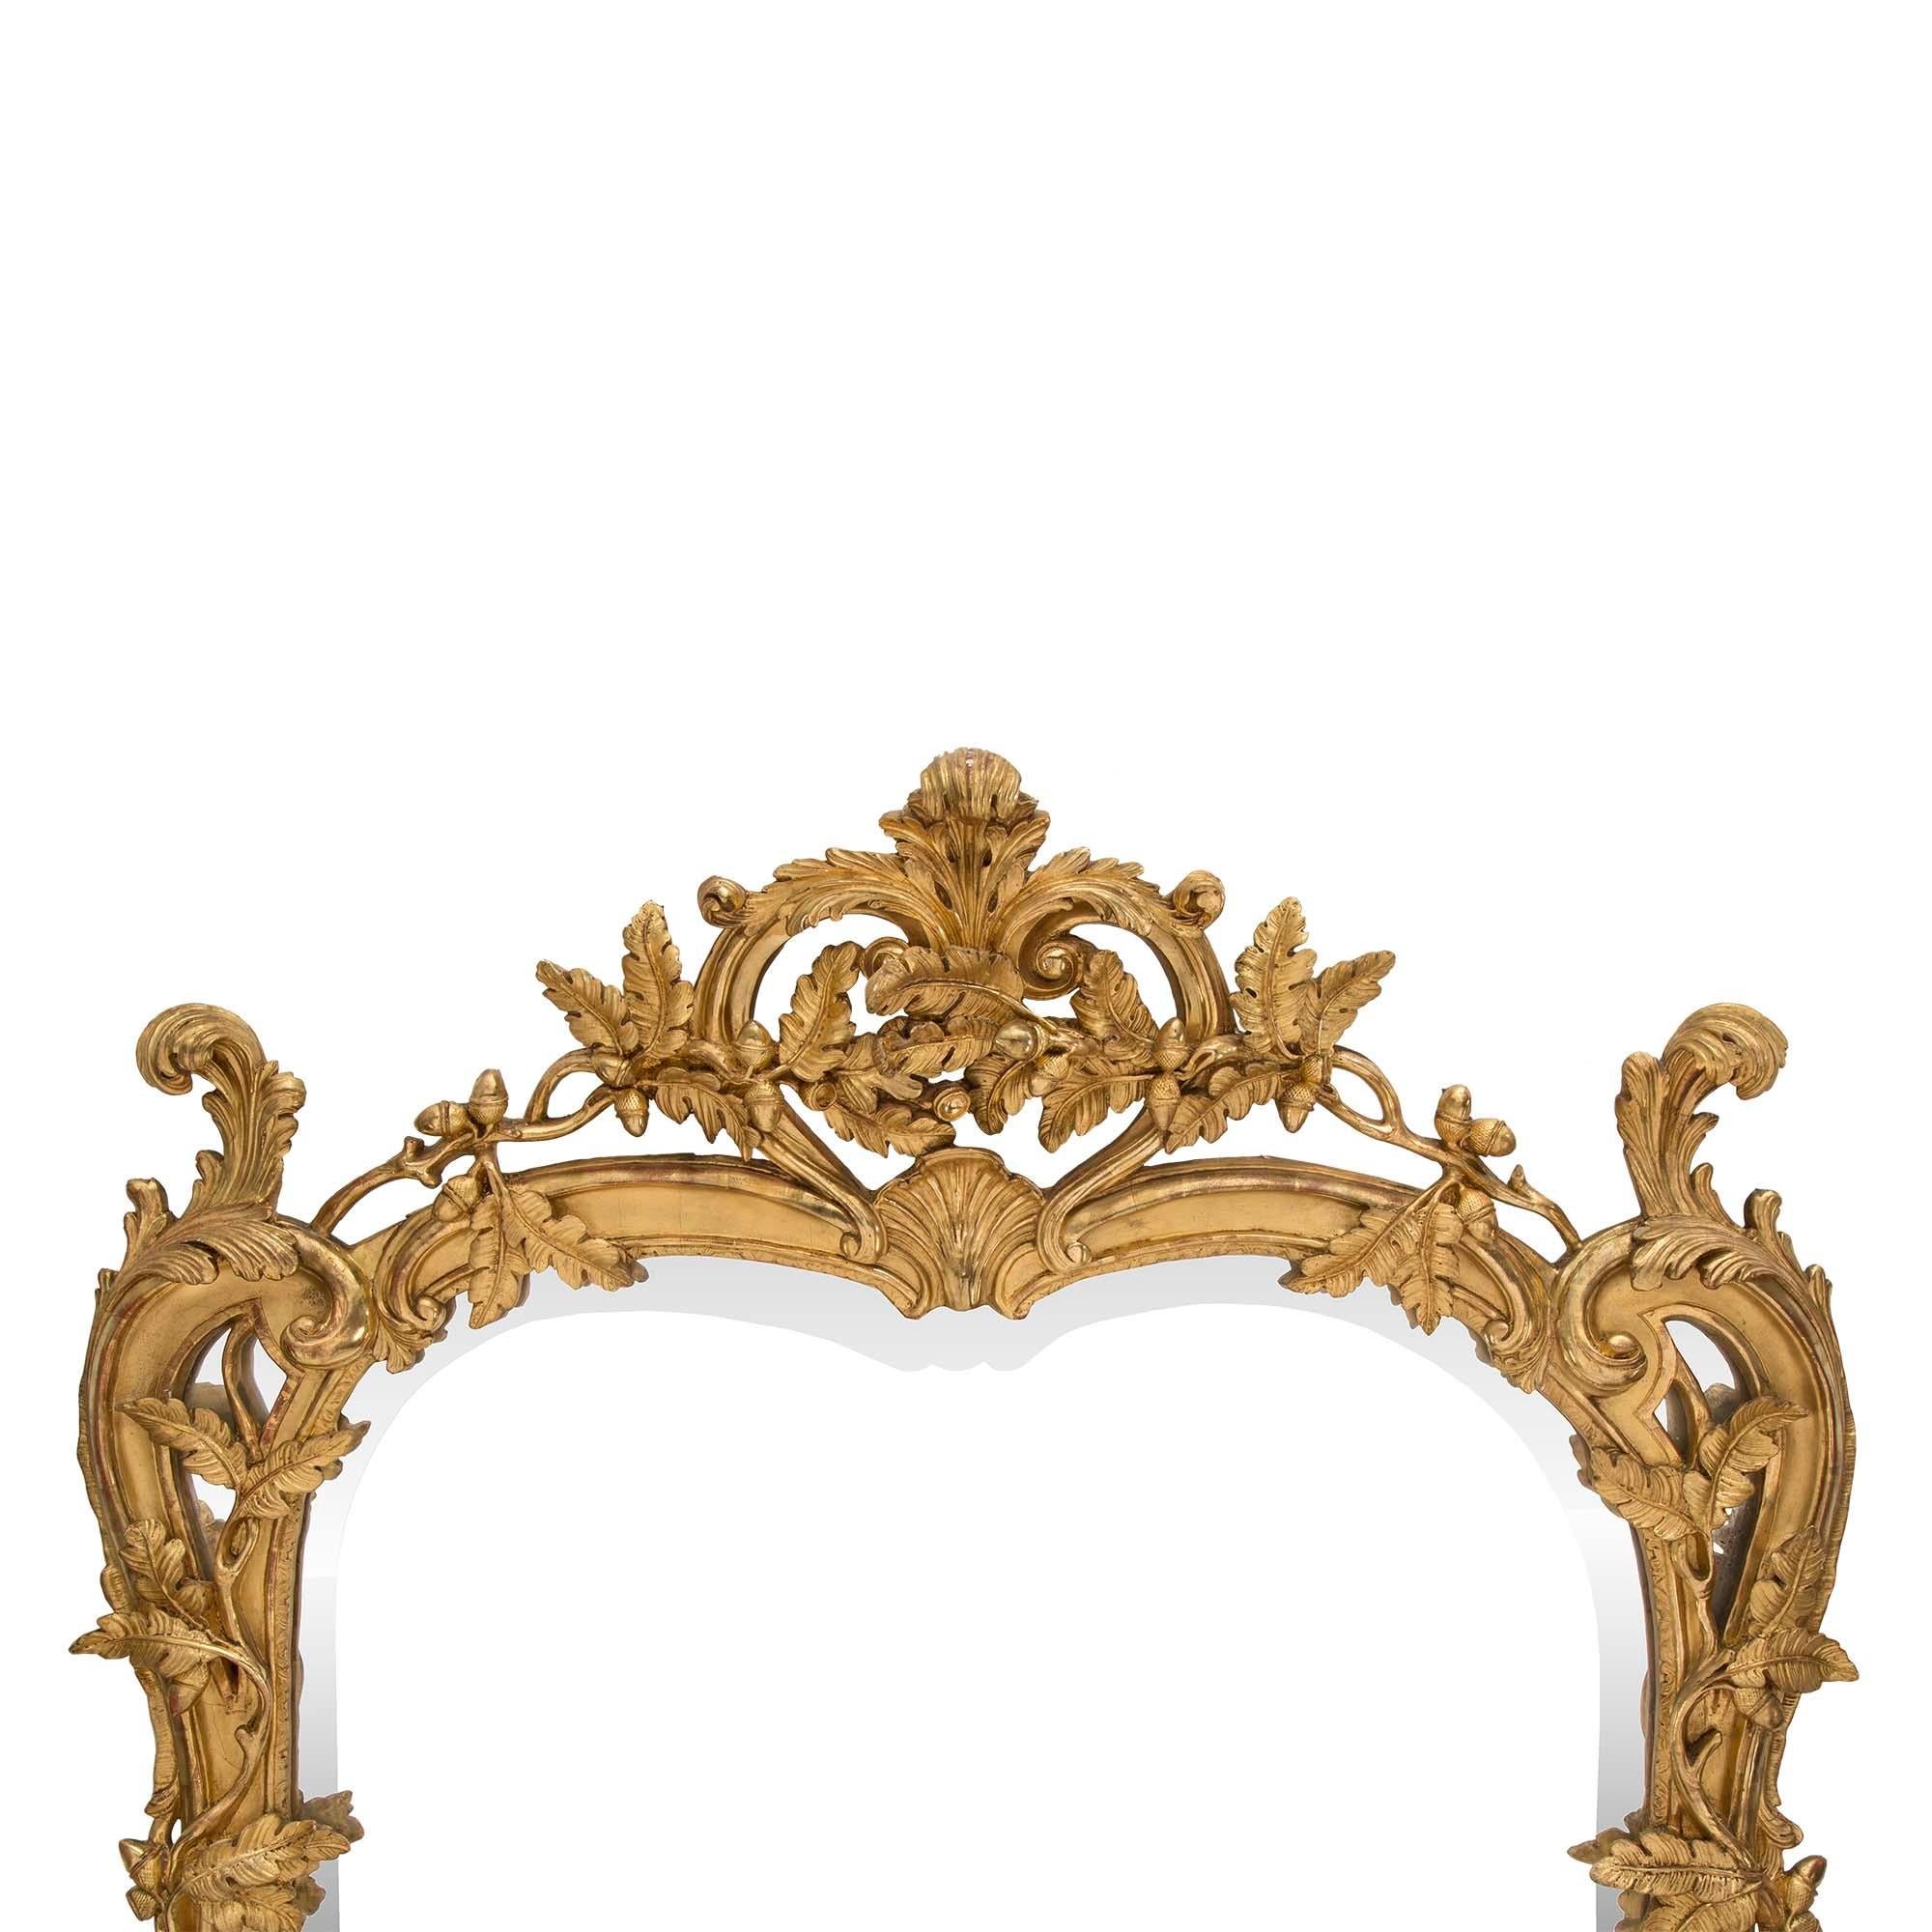 French Mid-19th Century Louis XV Style Giltwood Mirror In Good Condition For Sale In West Palm Beach, FL